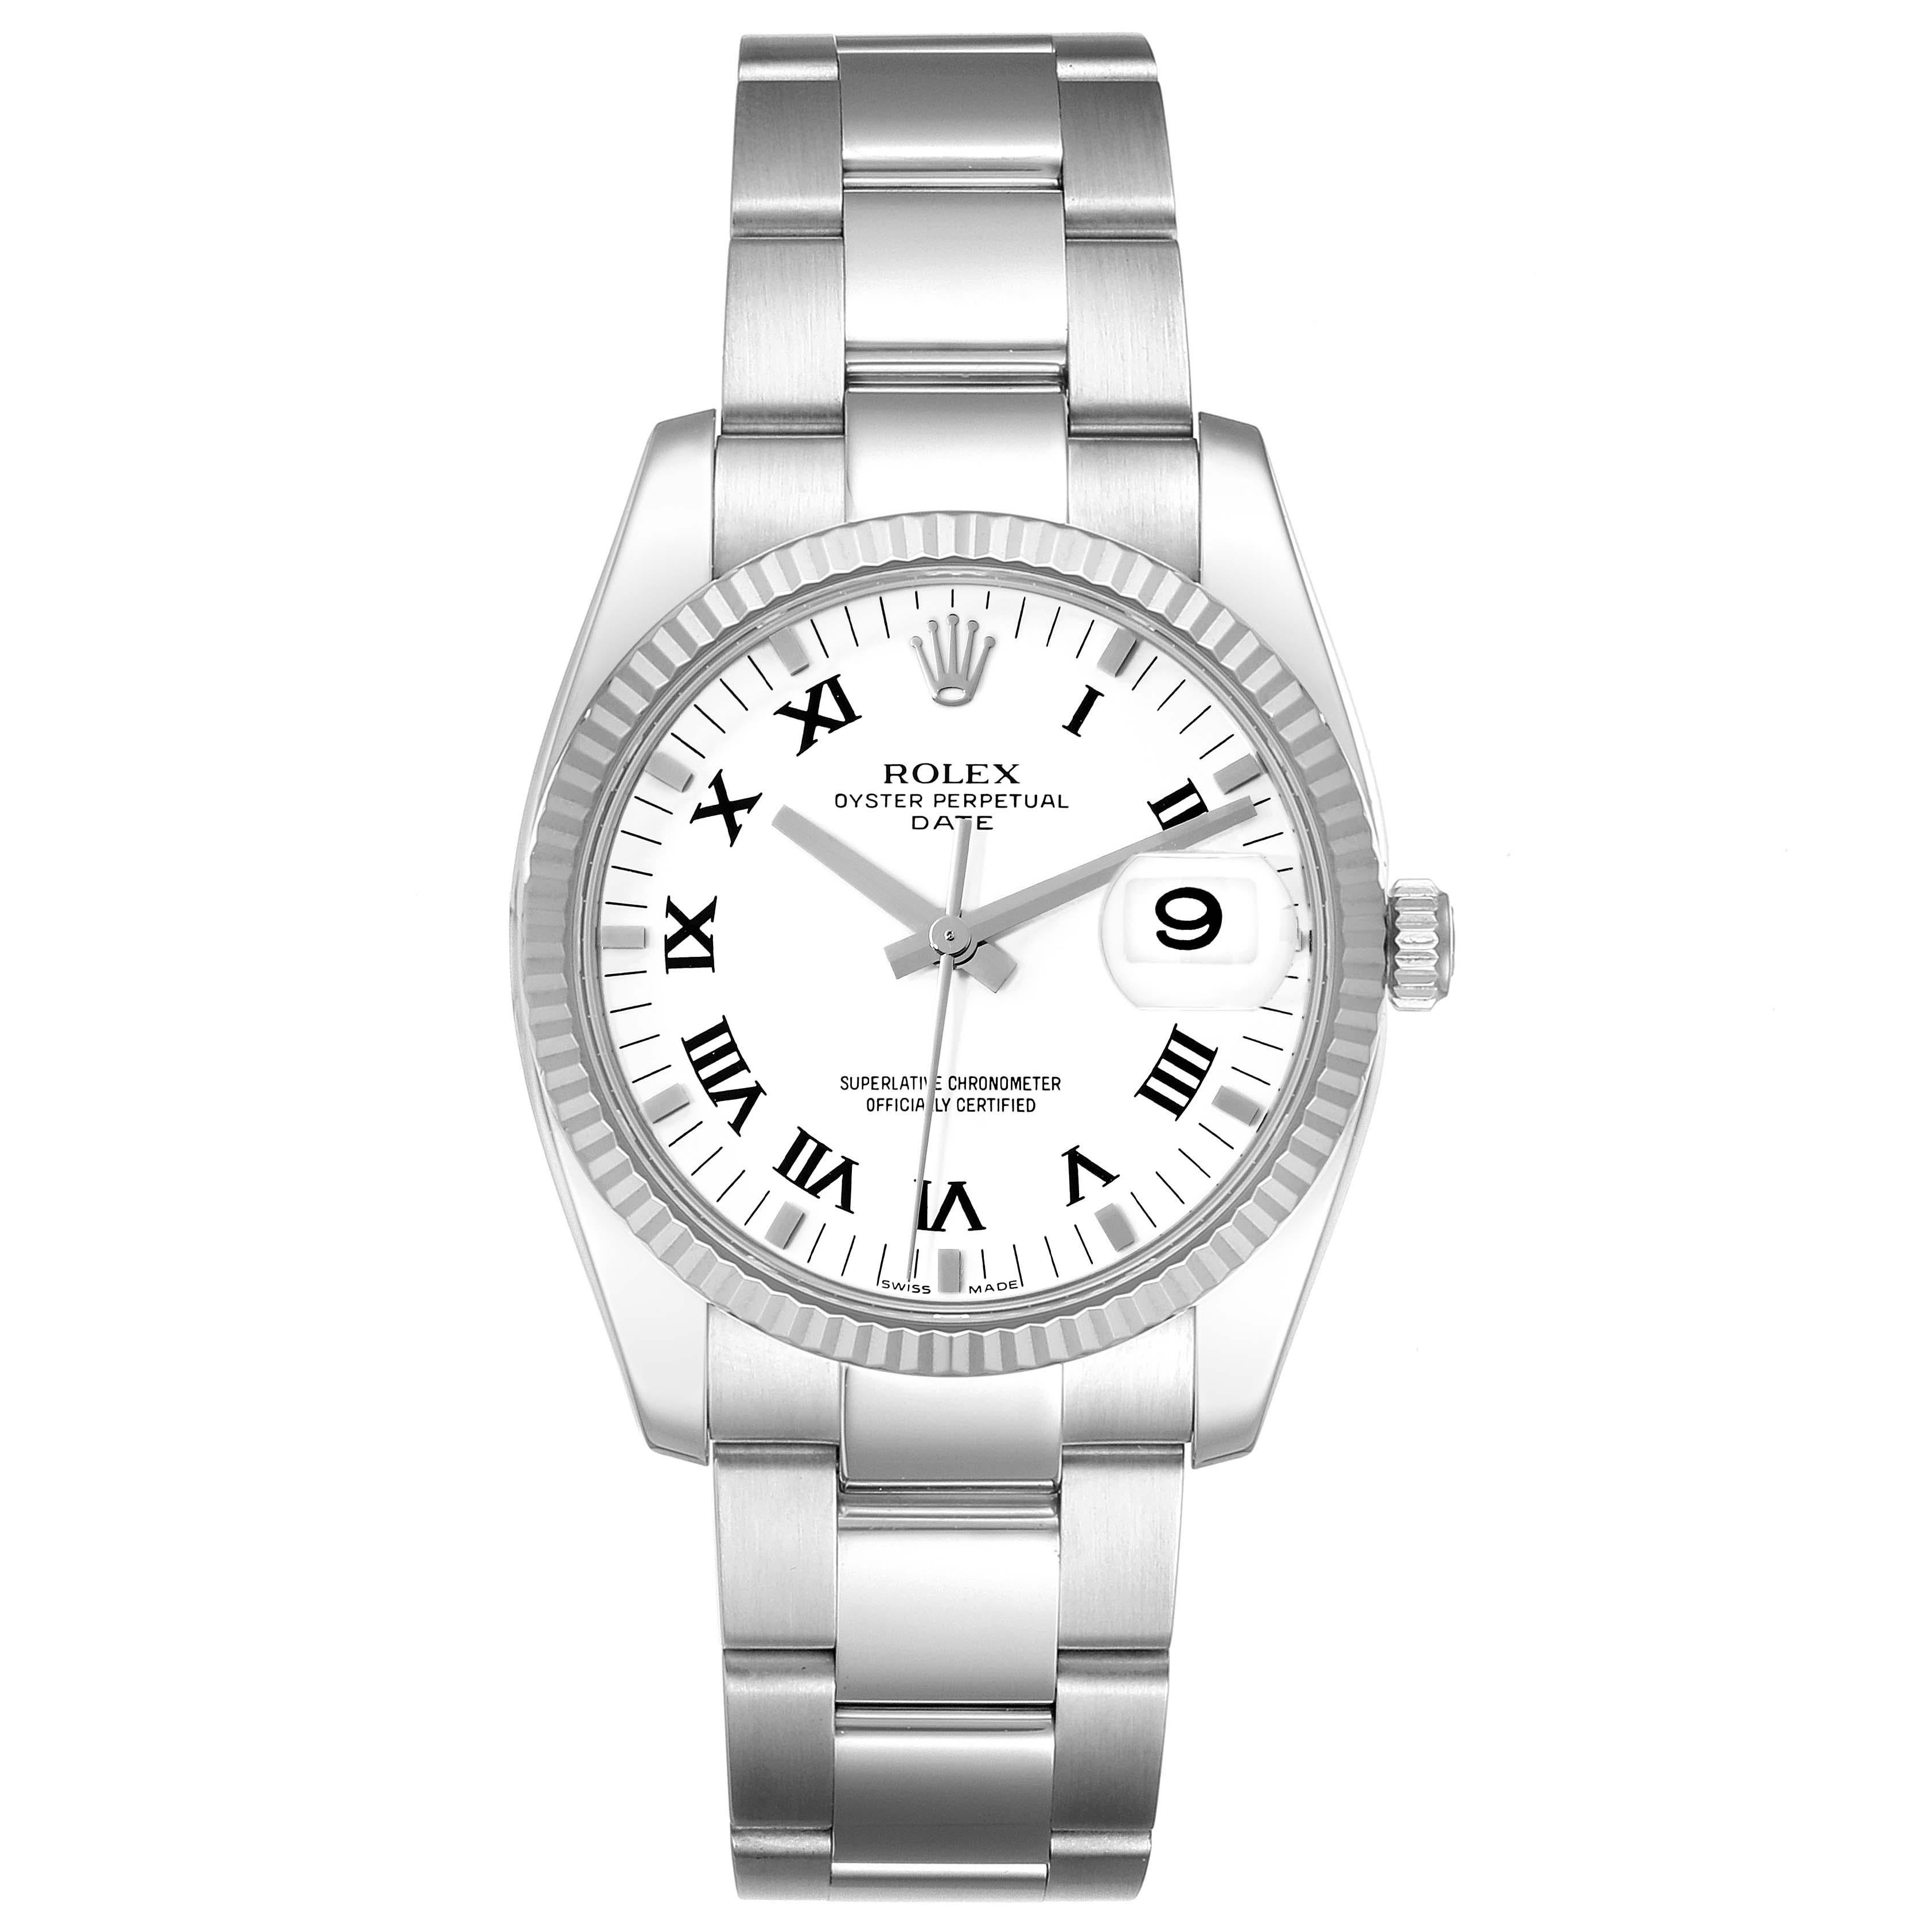 Rolex Date 34 Steel White Gold Roman Dial Mens Watch 115234. Officially certified chronometer self-winding movement with quickset date. Stainless steel case 34 mm in diameter. High polished lugs. Rolex logo on a crown. 18K white gold fluted bezel.